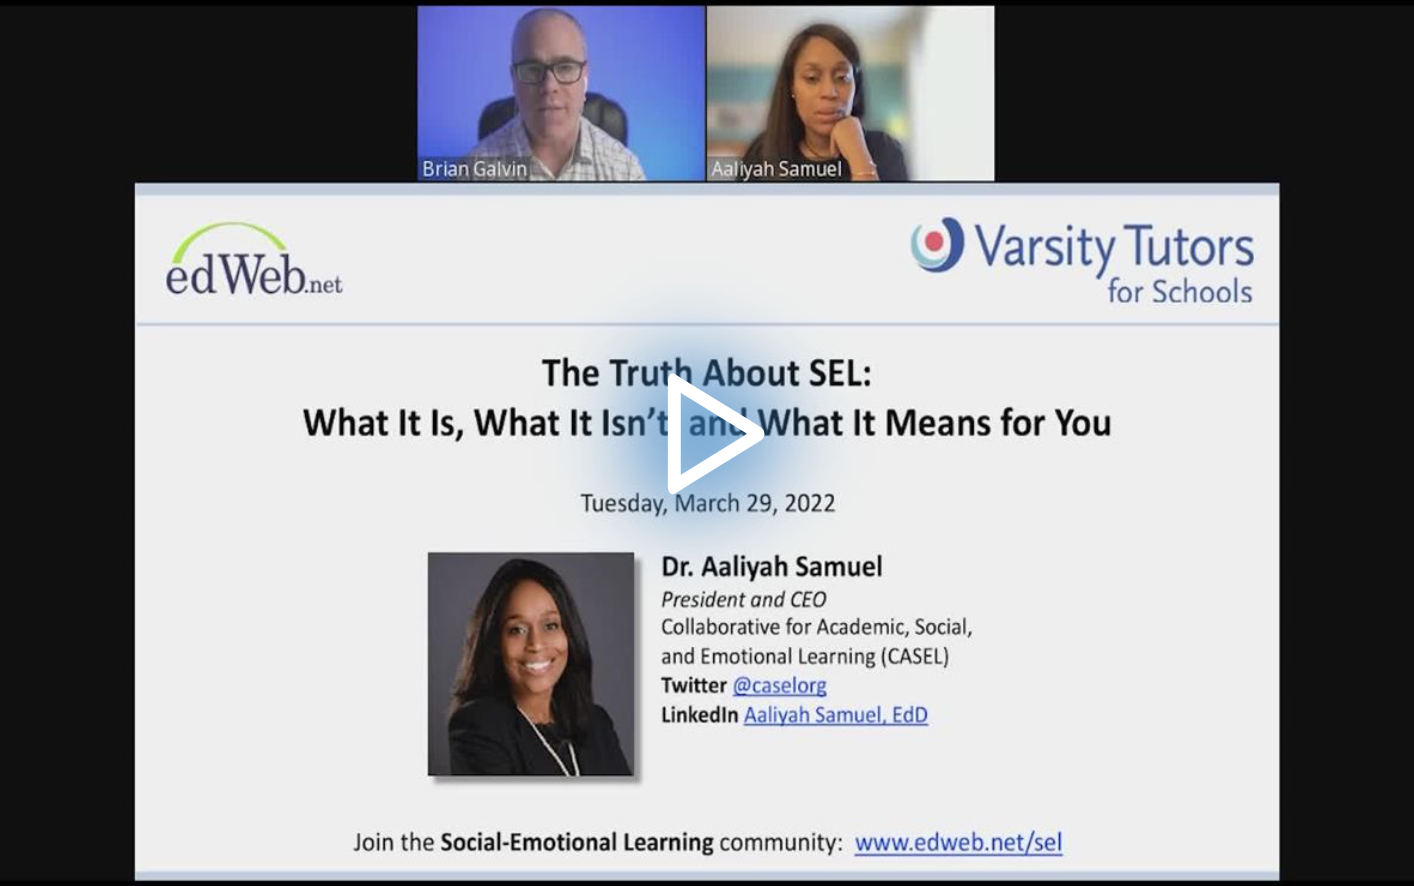 The Truth About SEL: What It Is, What It Isn’t, and What It Means for You edLeader Panel recording link